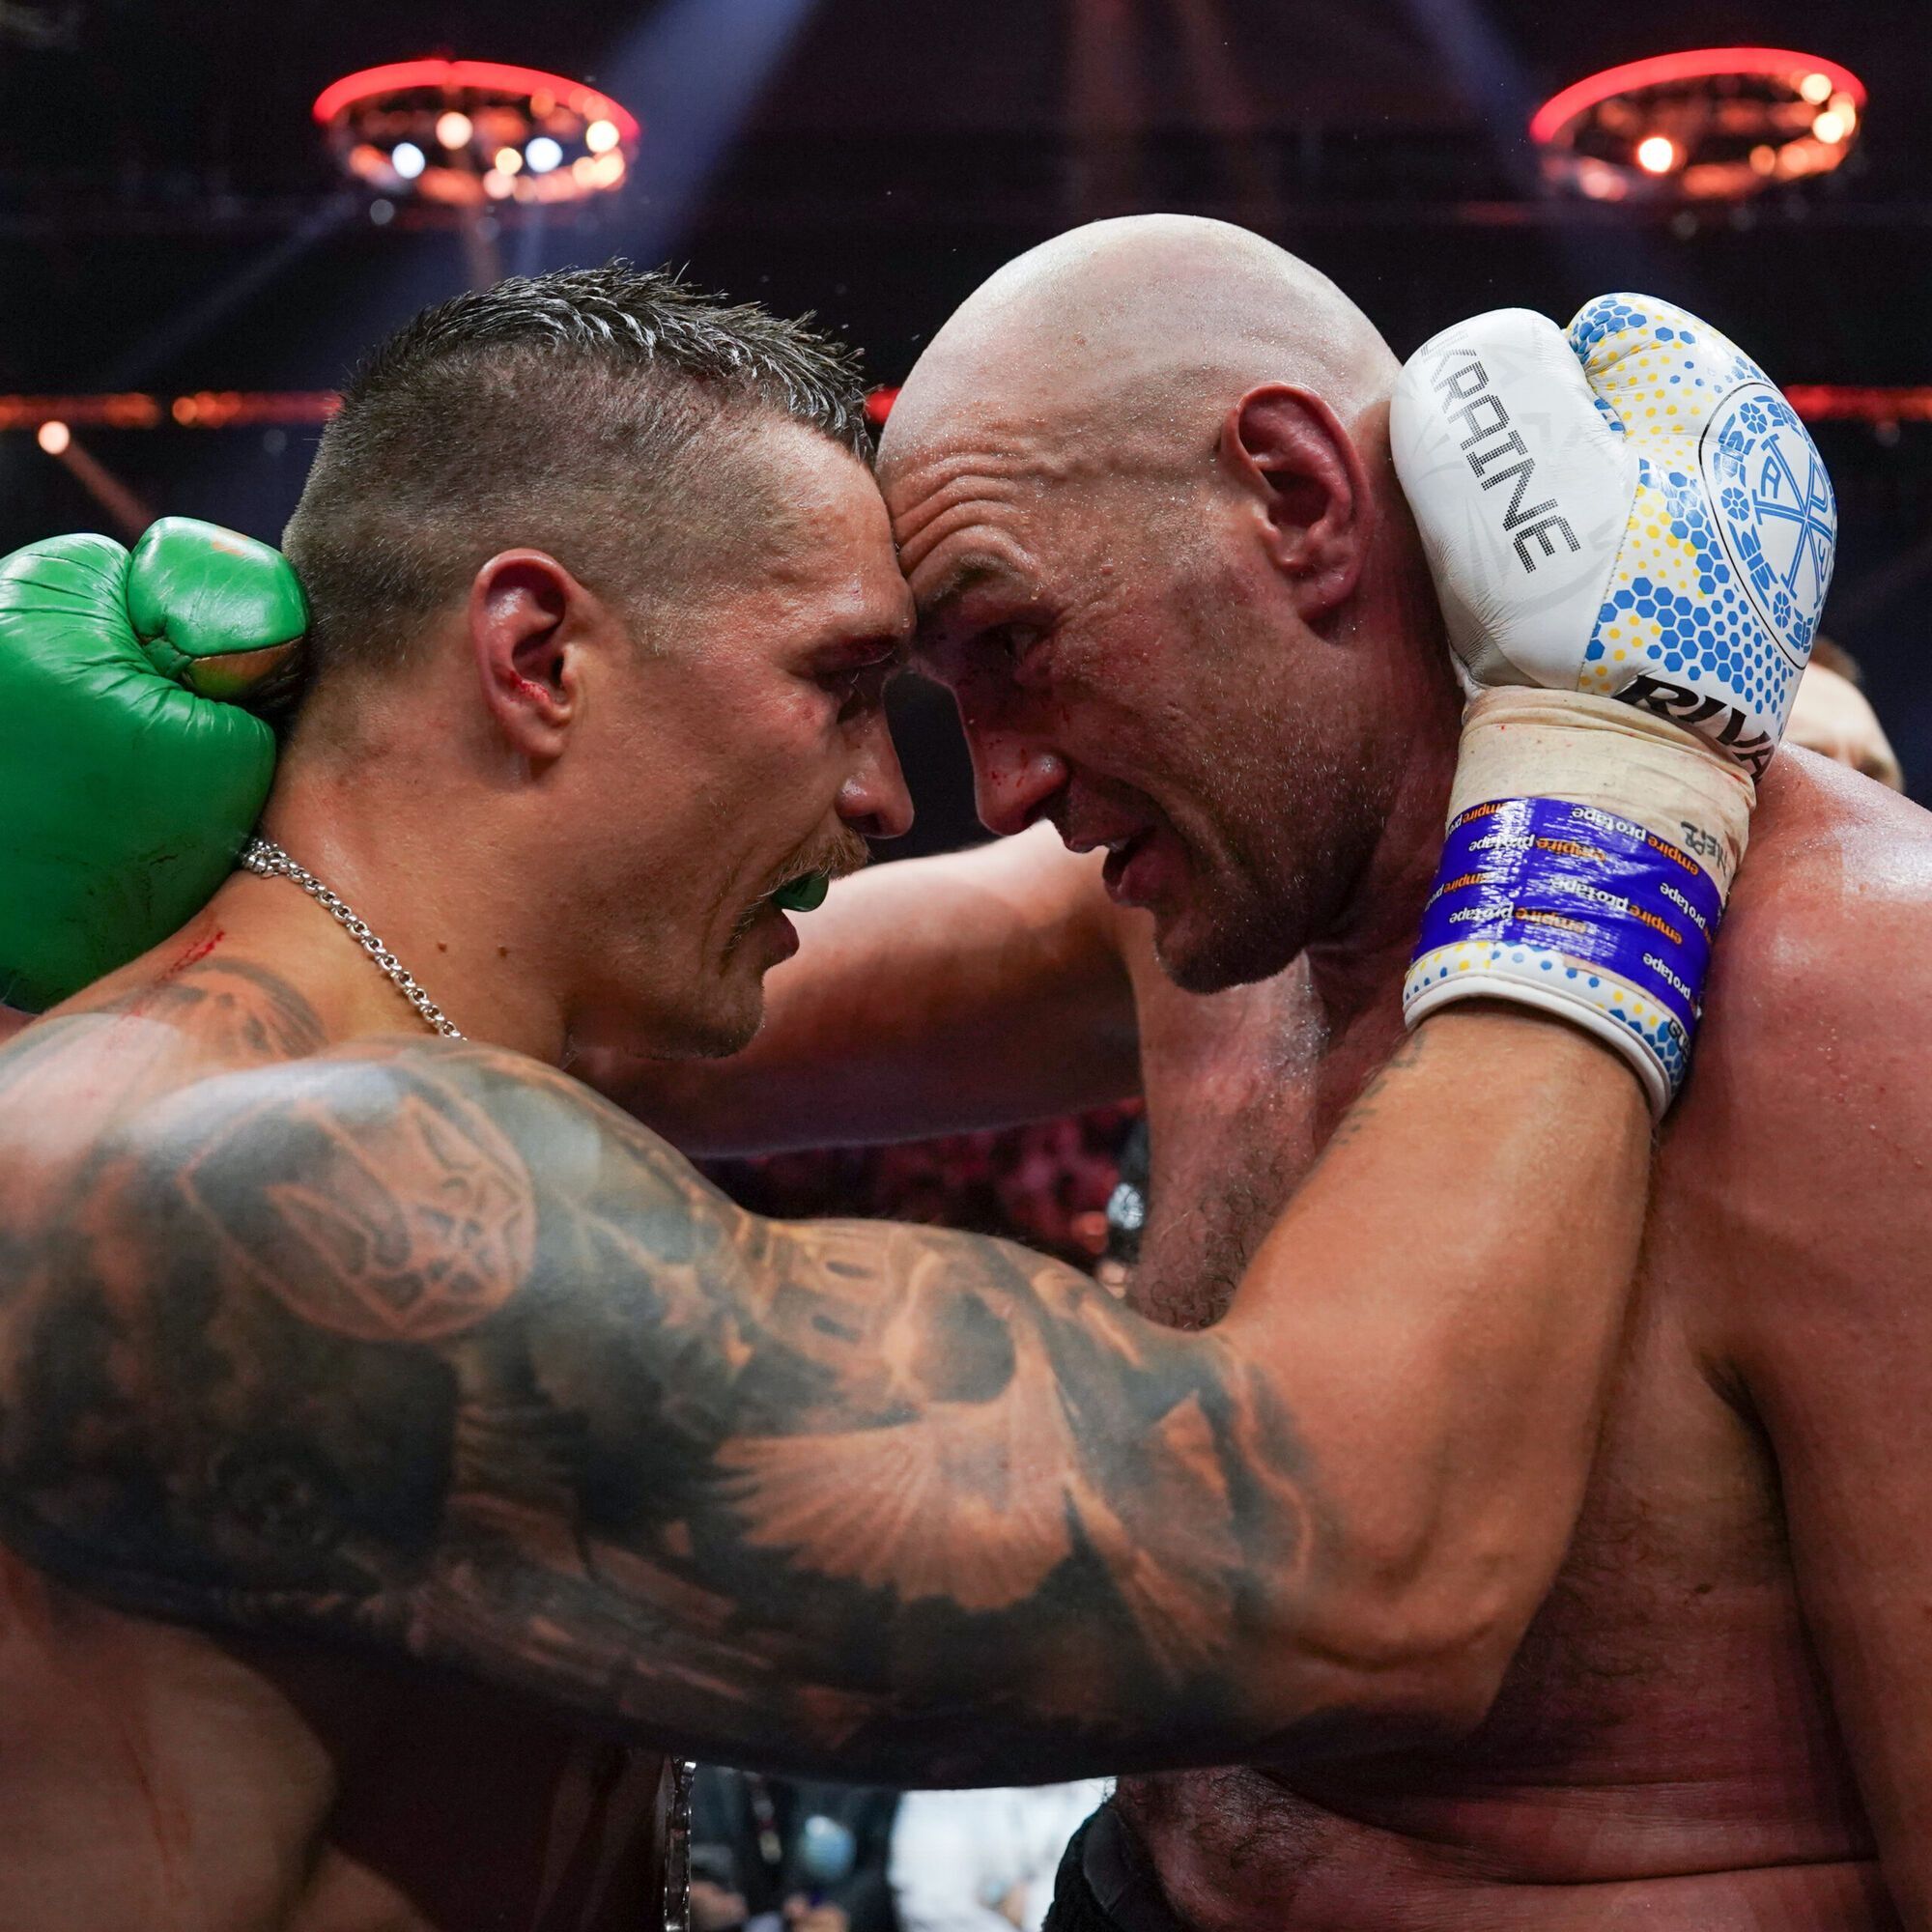 ''There were a lot of mistakes'': boxing legend from Russia evaluates Usyk's victory over Fury